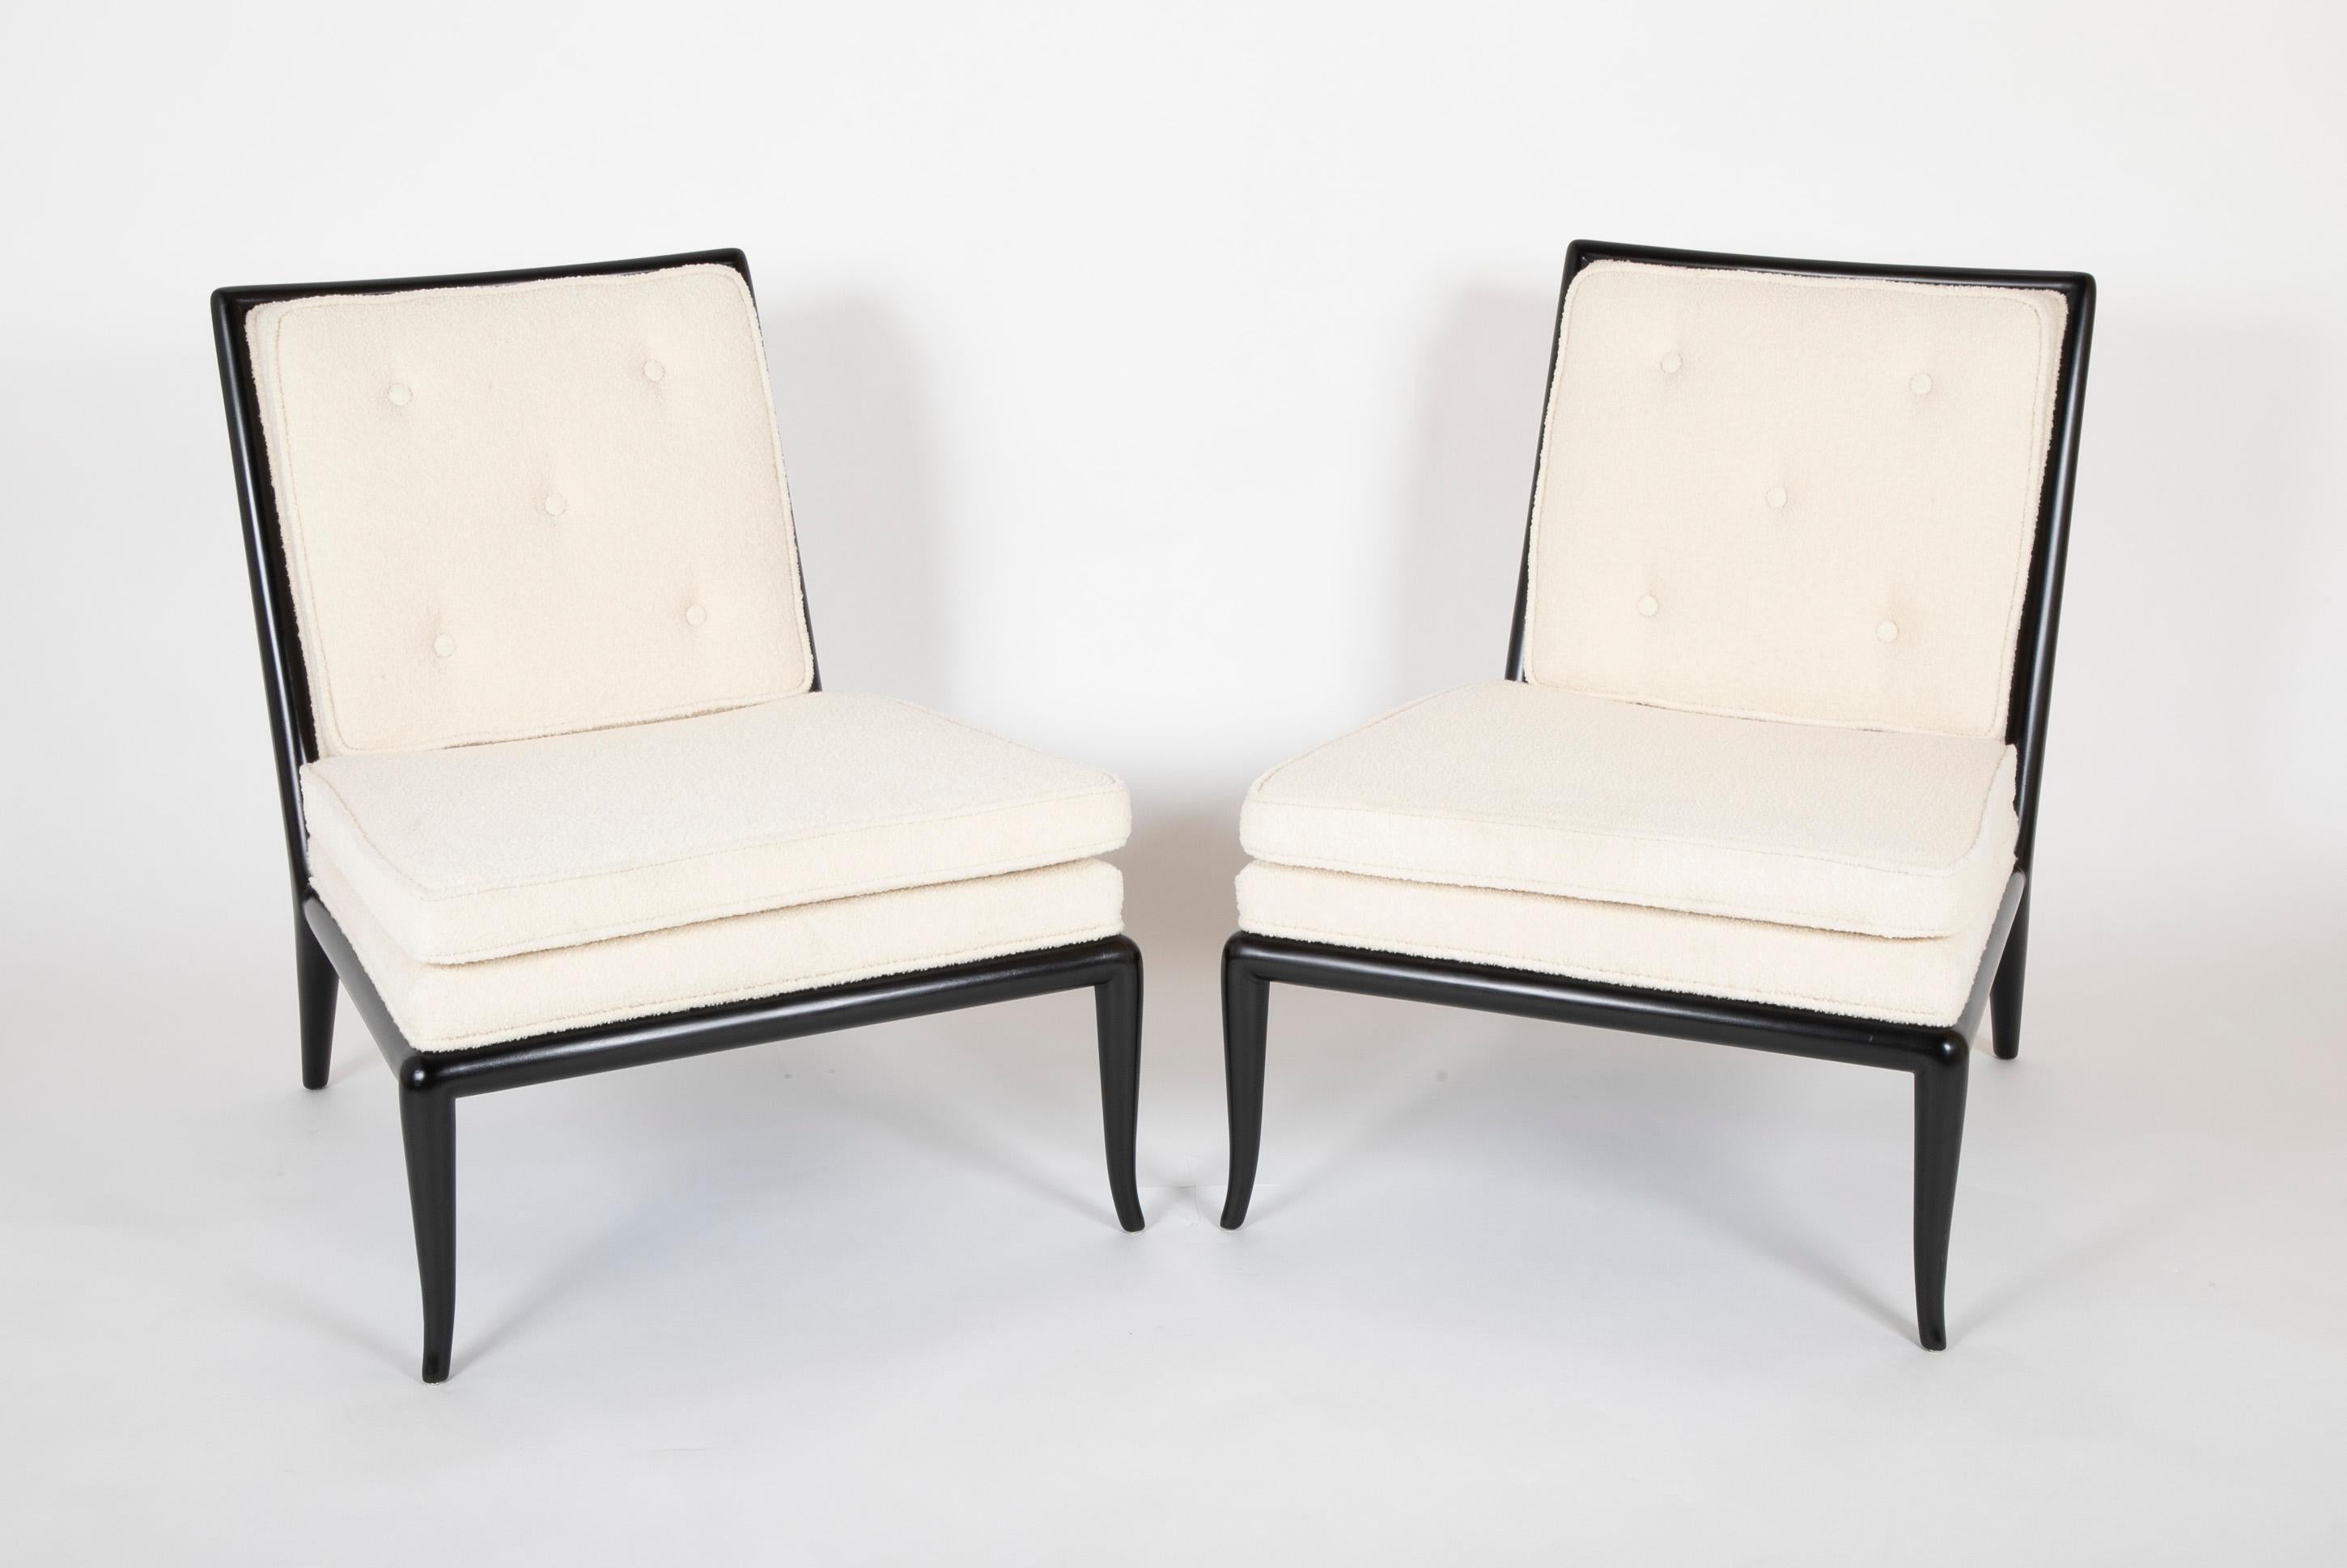 Pair of T.H Robsjohn-Gibbings for Widdicomb slipper chairs with ebonized flared legs. Upholstered seat and cushion, circa 1950s.